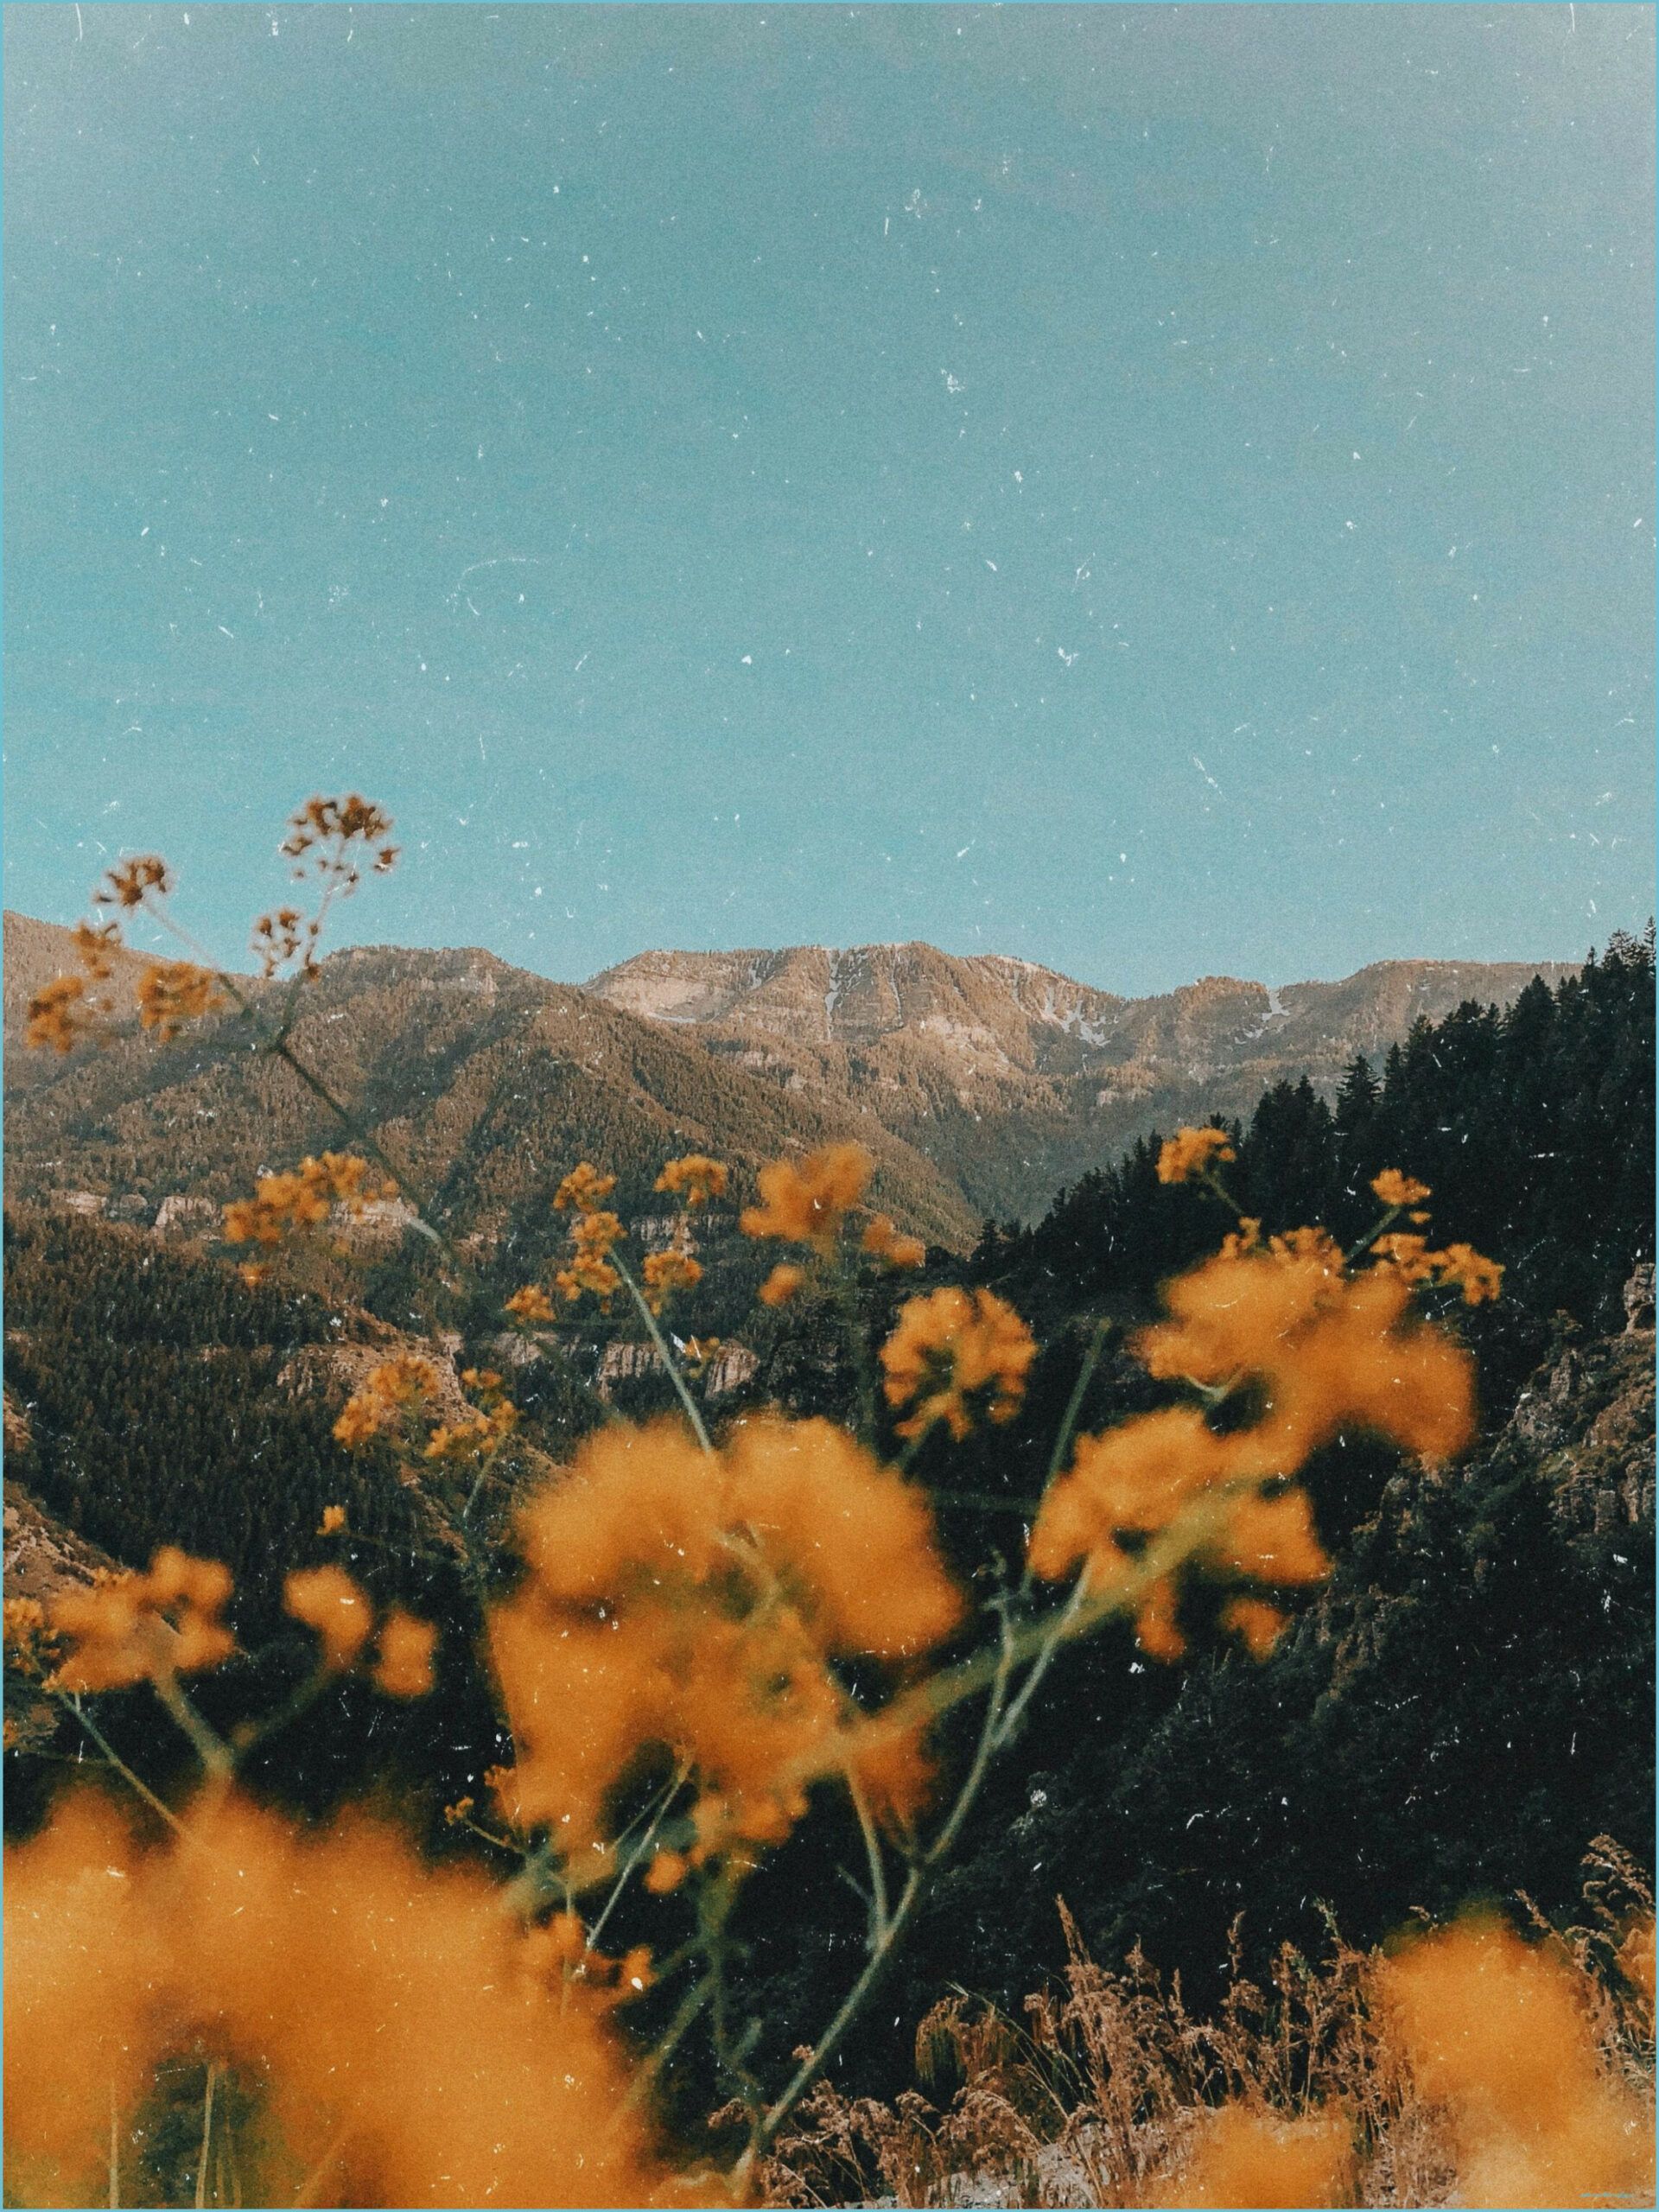 yellow dreams Aesthetic background, Landscape photography aesthetic wallpaper